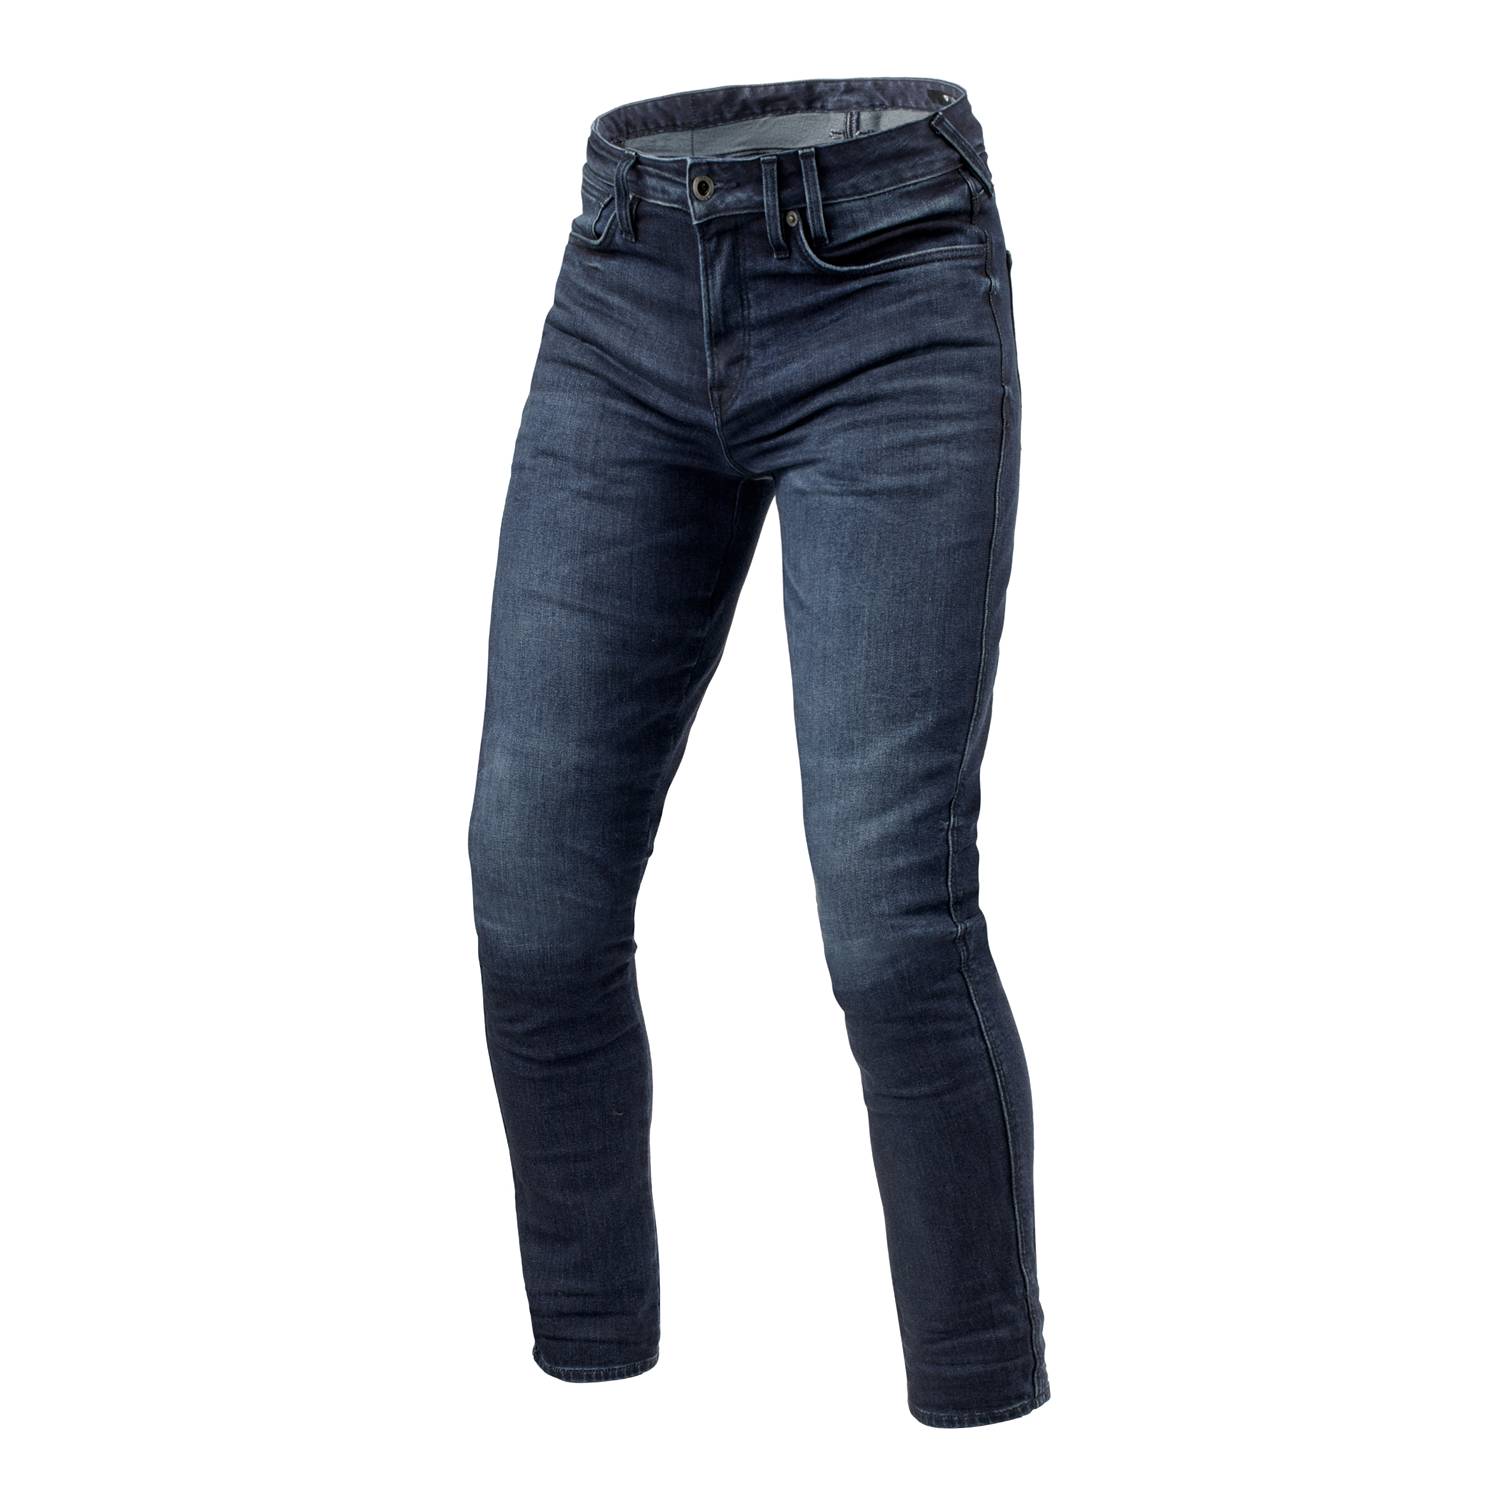 Image of EU REV'IT! Jeans Carlin SK Dark Blue Used L32 Motorcycle Jeans Taille L32/W34